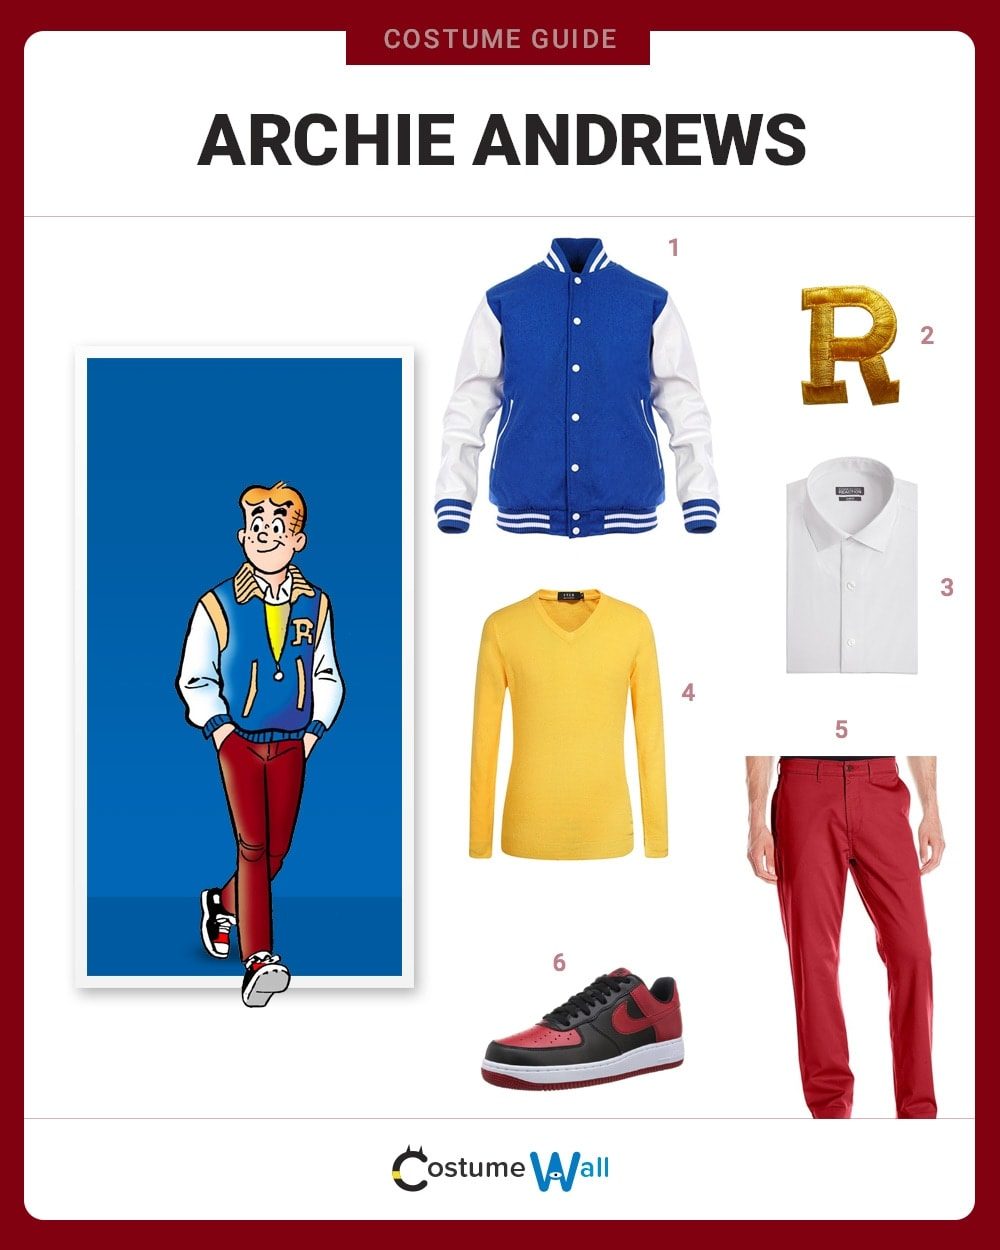 Archie Andrews Costume Guide